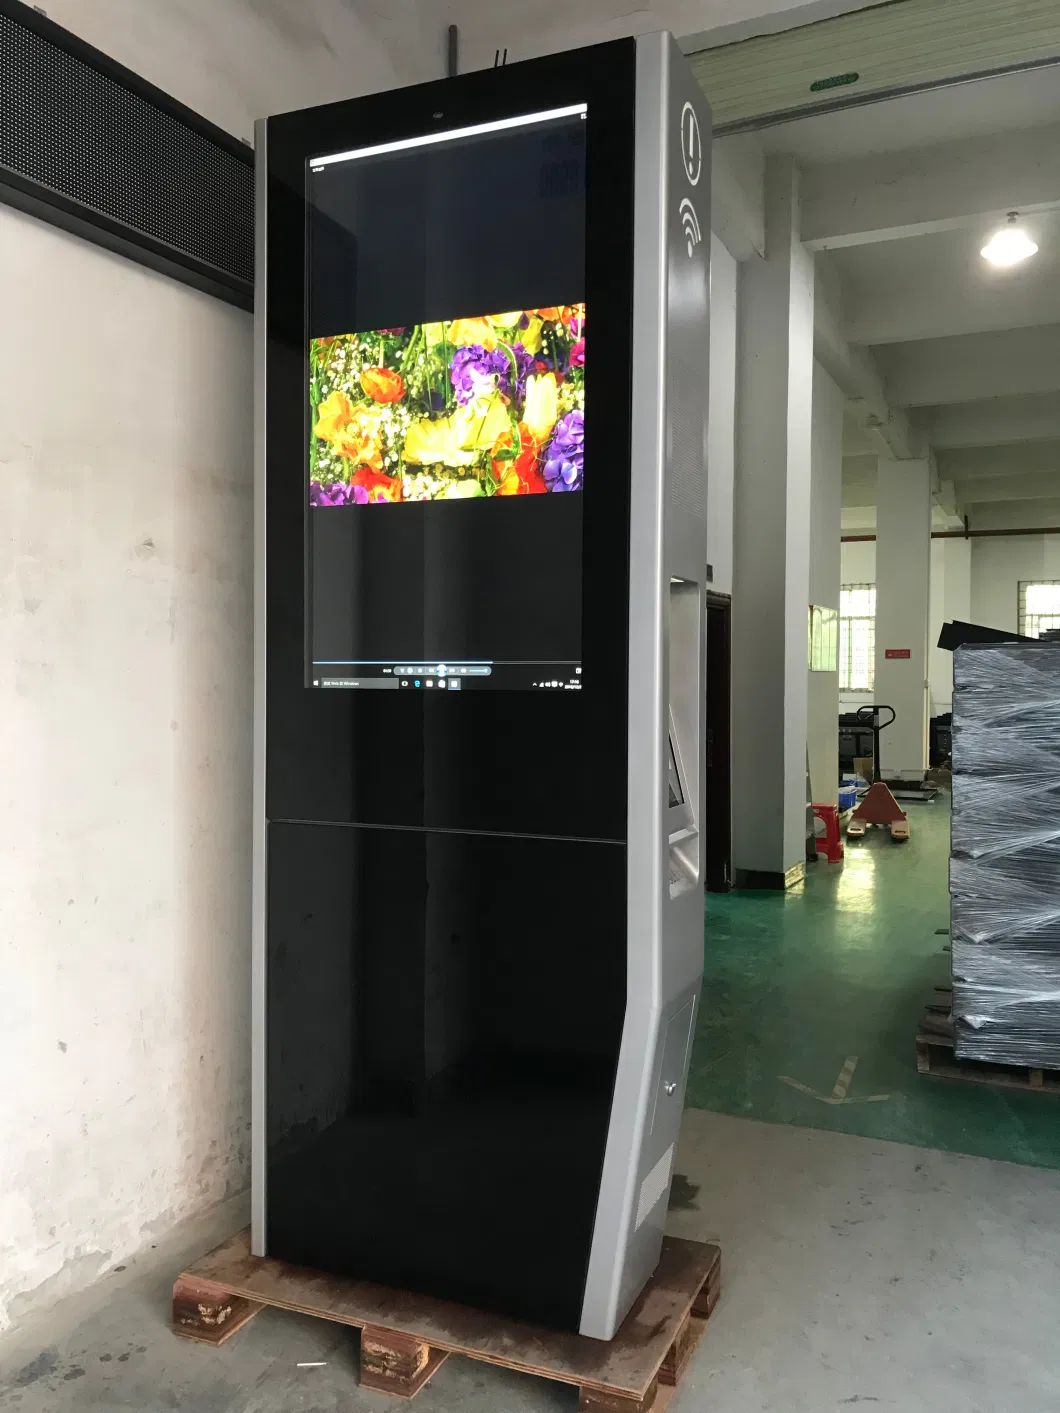 ODM Advertising Screen Air-Cooled Horizontal Screen Wall Hanging Outdoor Advertising Machine 55 Inch Ultra Thin Advertising Kiosk 2 Year Warranty Monitor